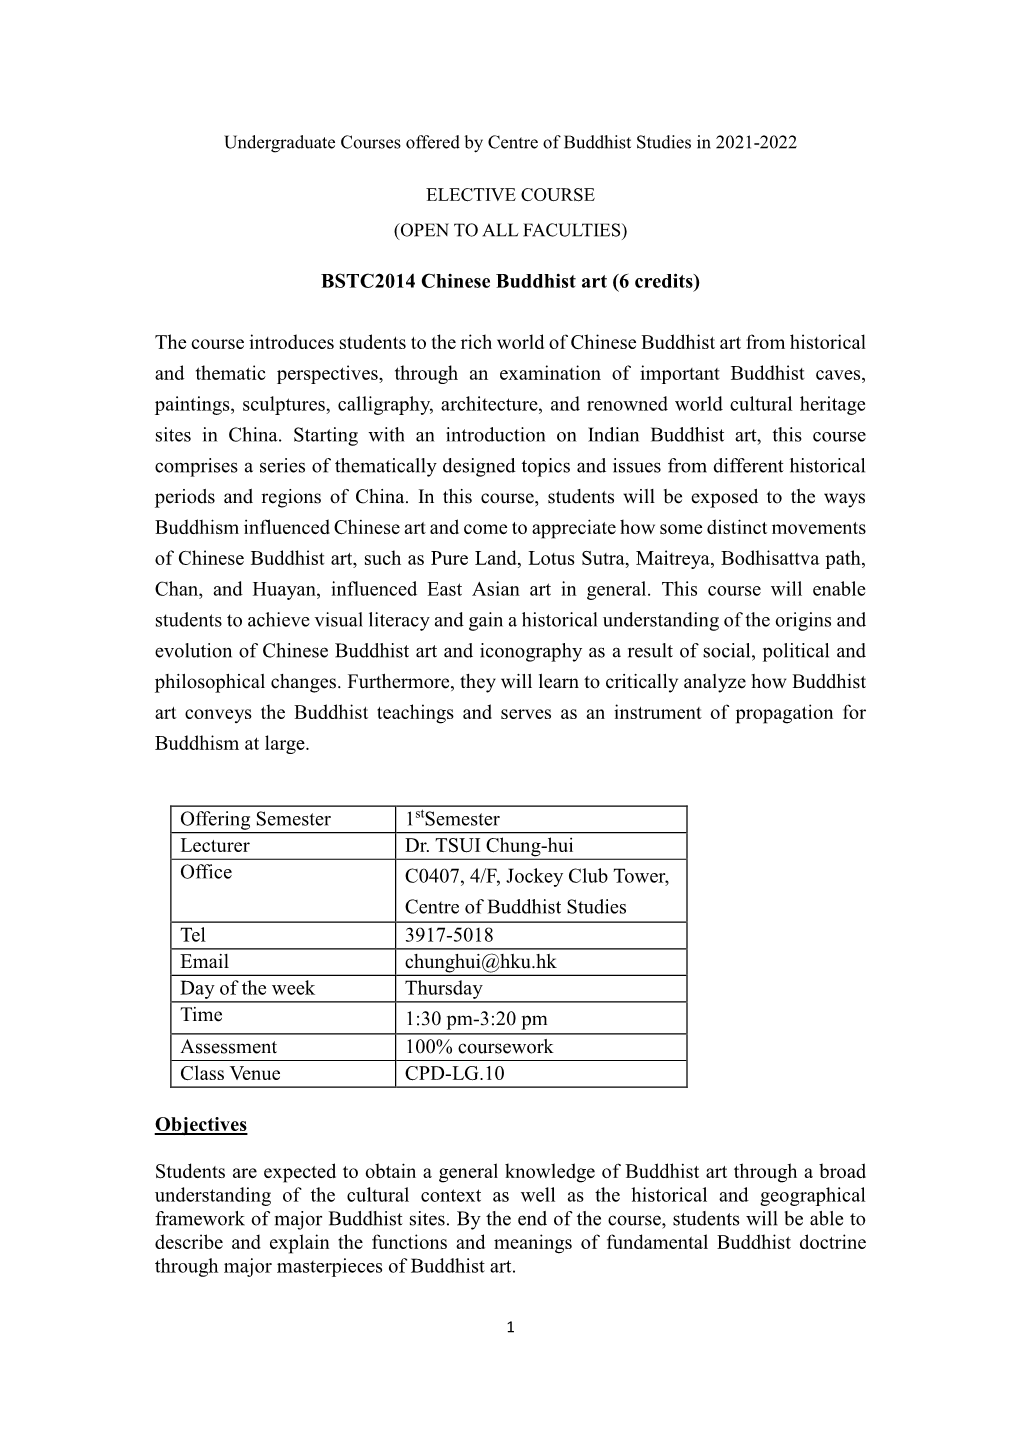 BSTC2014 Chinese Buddhist Art (6 Credits) the Course Introduces